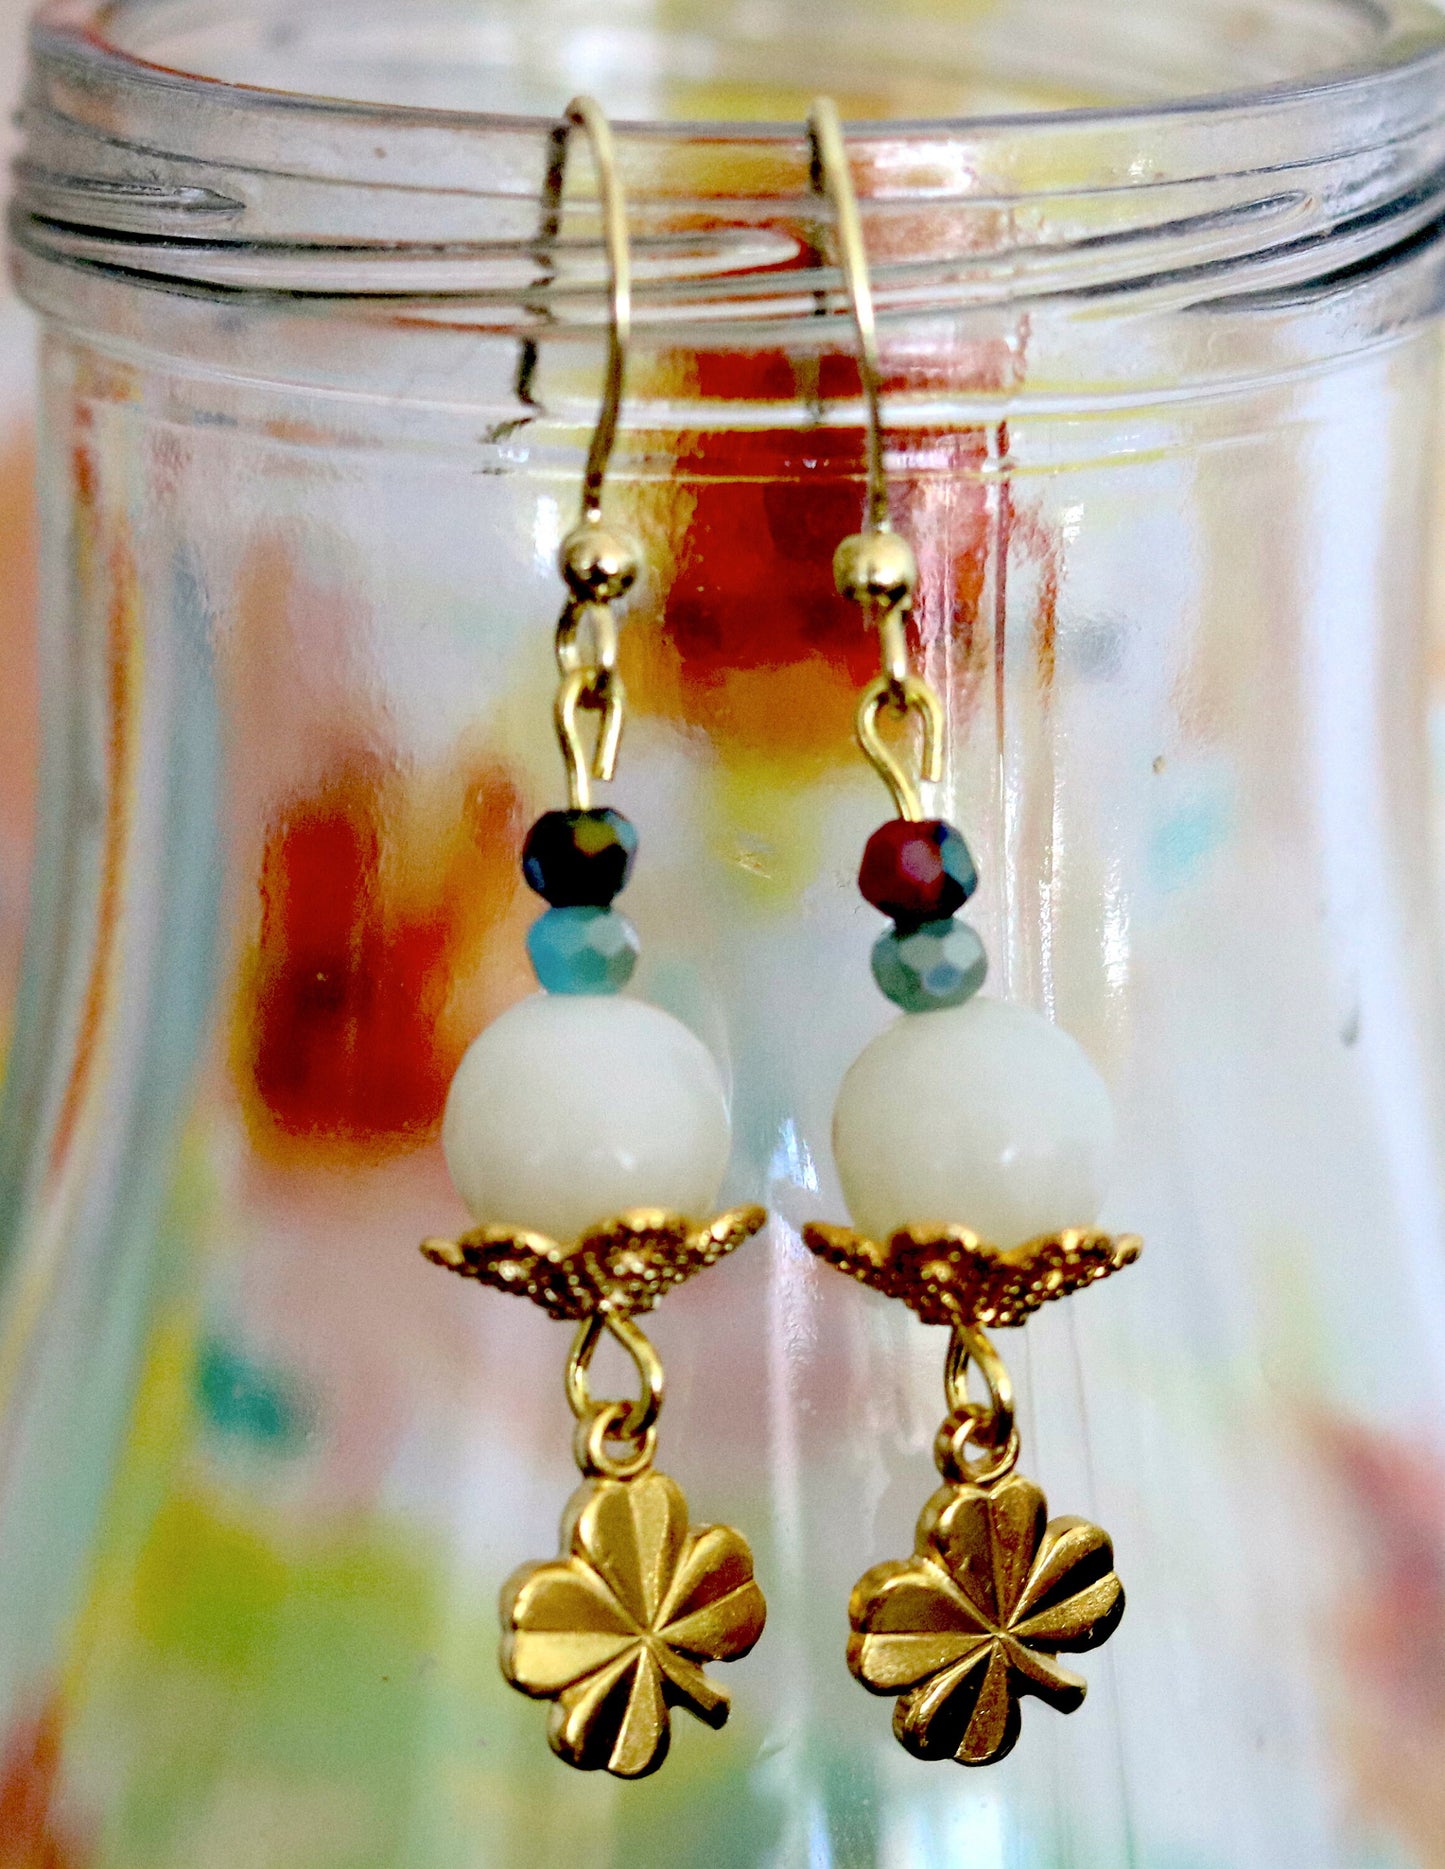 Gold and New Jade Bead Earrings